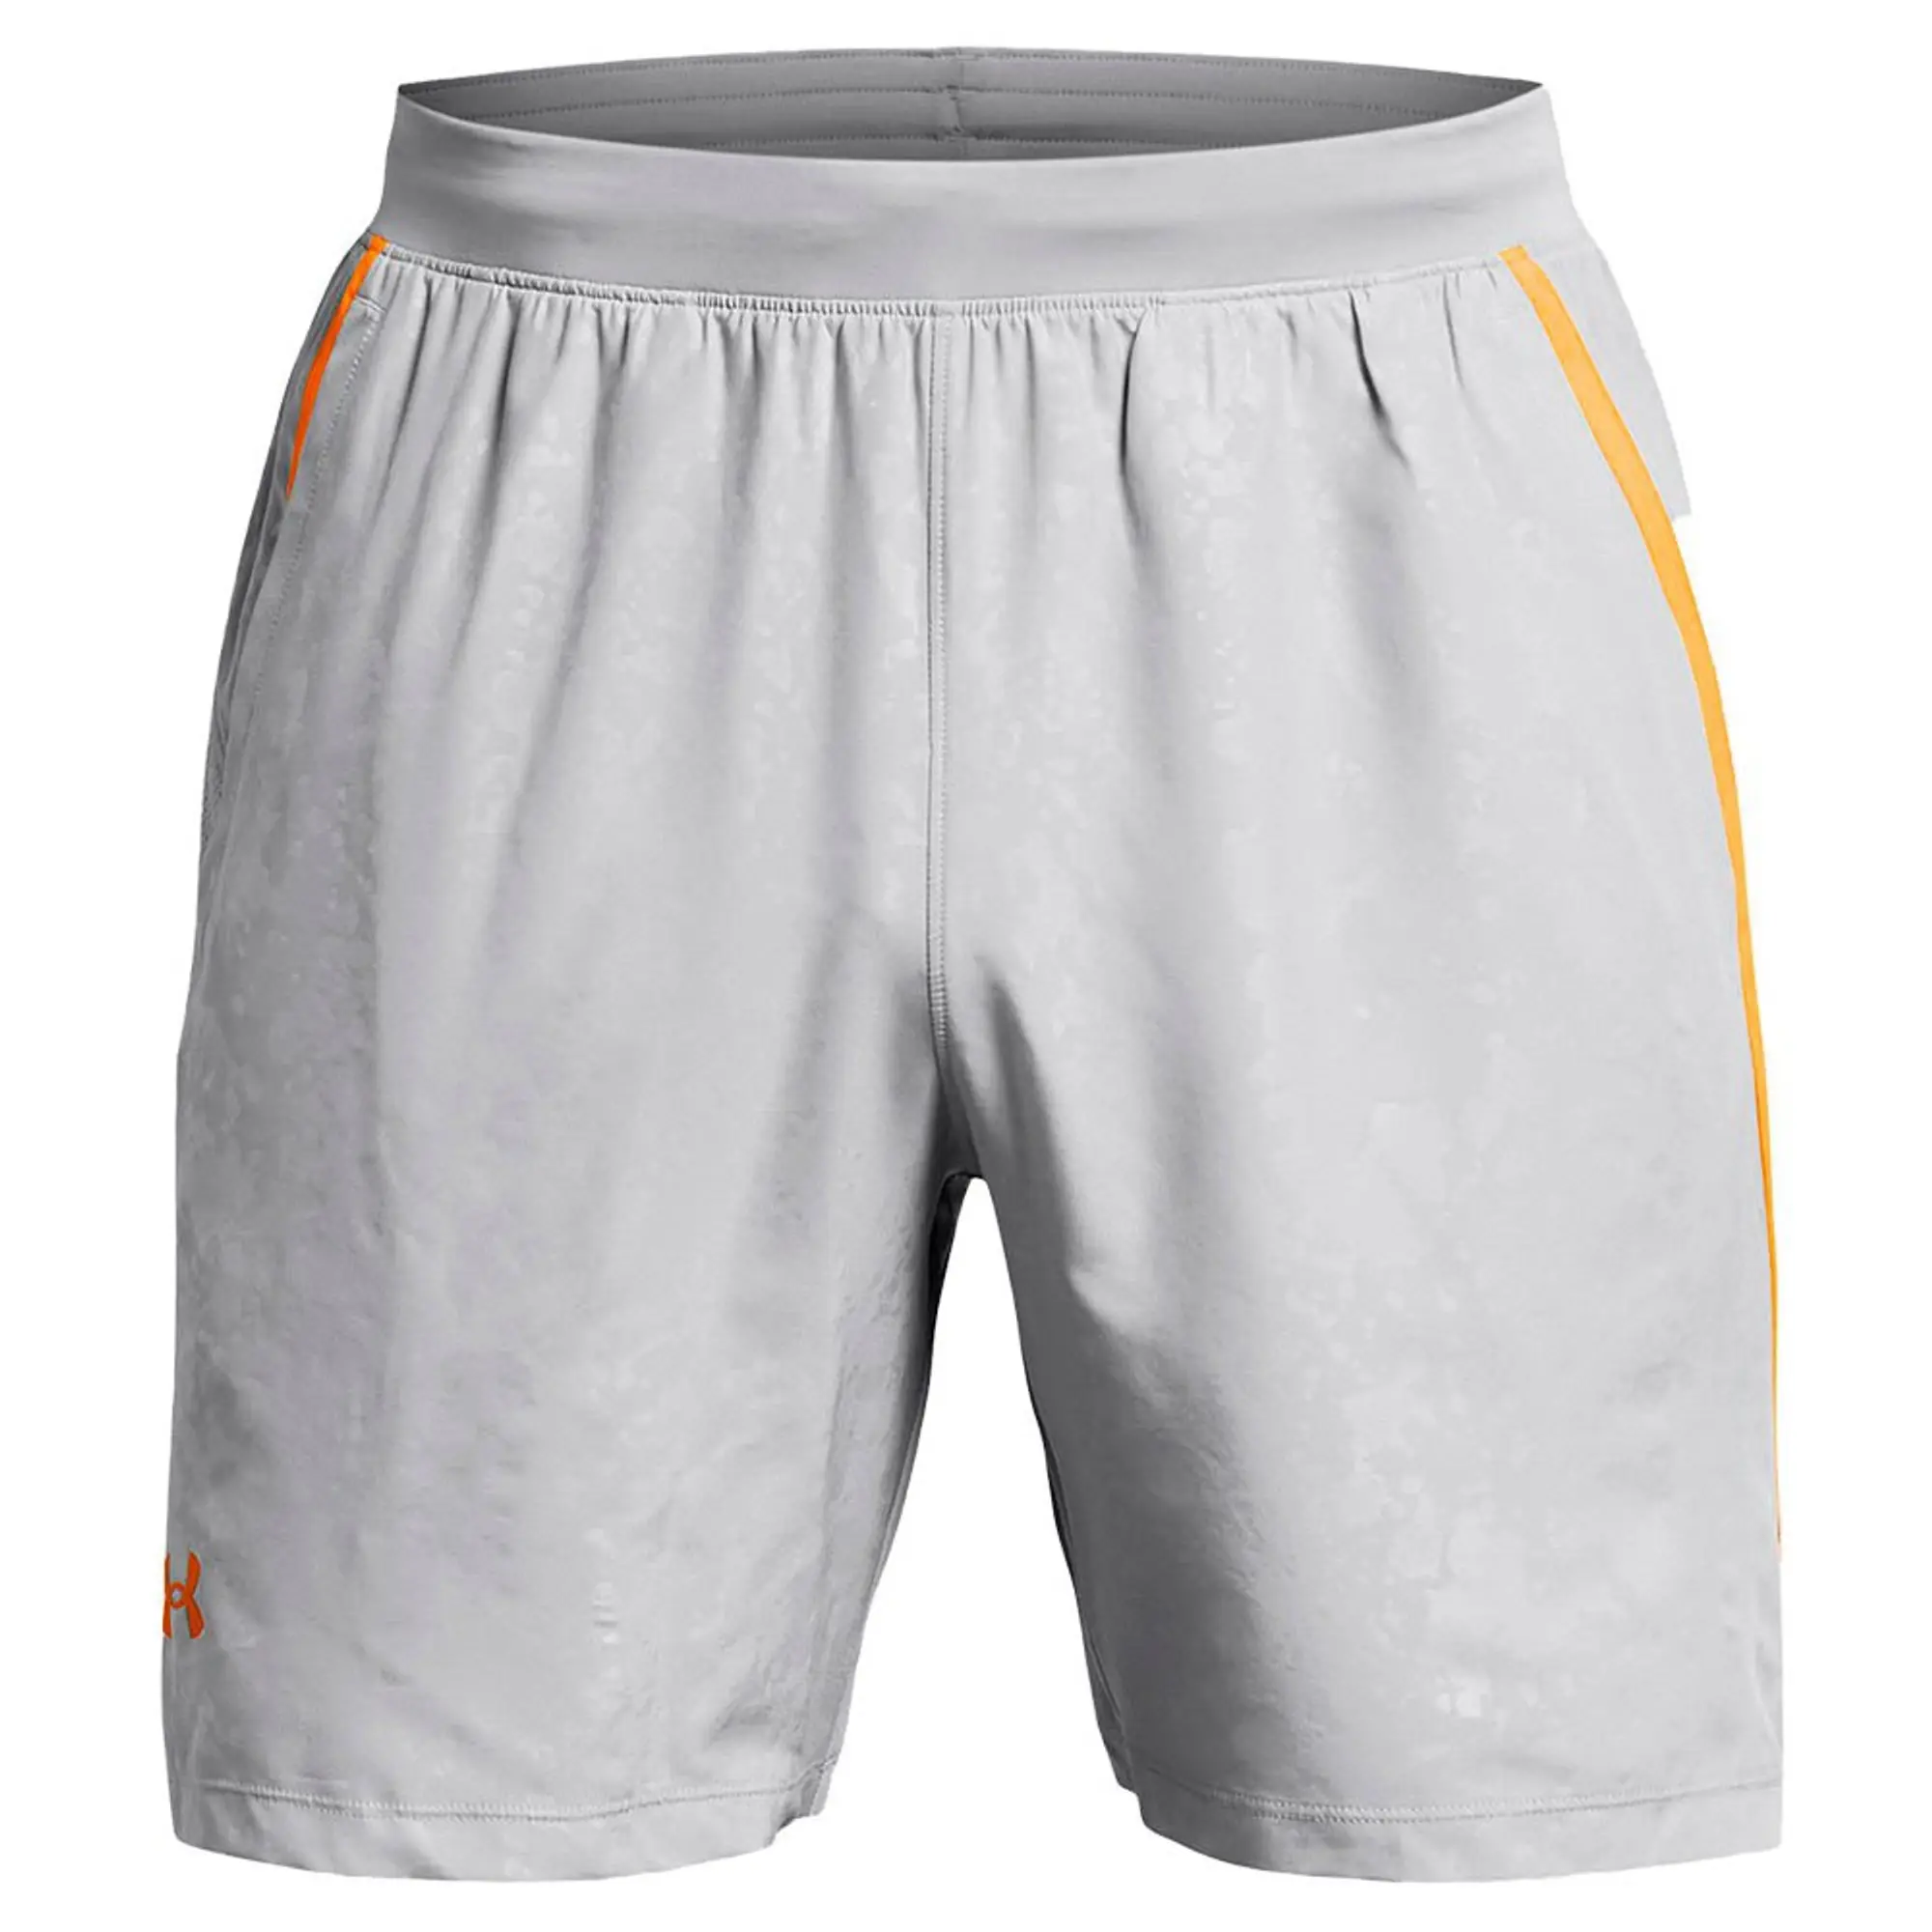 Under Armour Launch 7in Shorts - Grey | 1382642-011 | FOOTY.COM